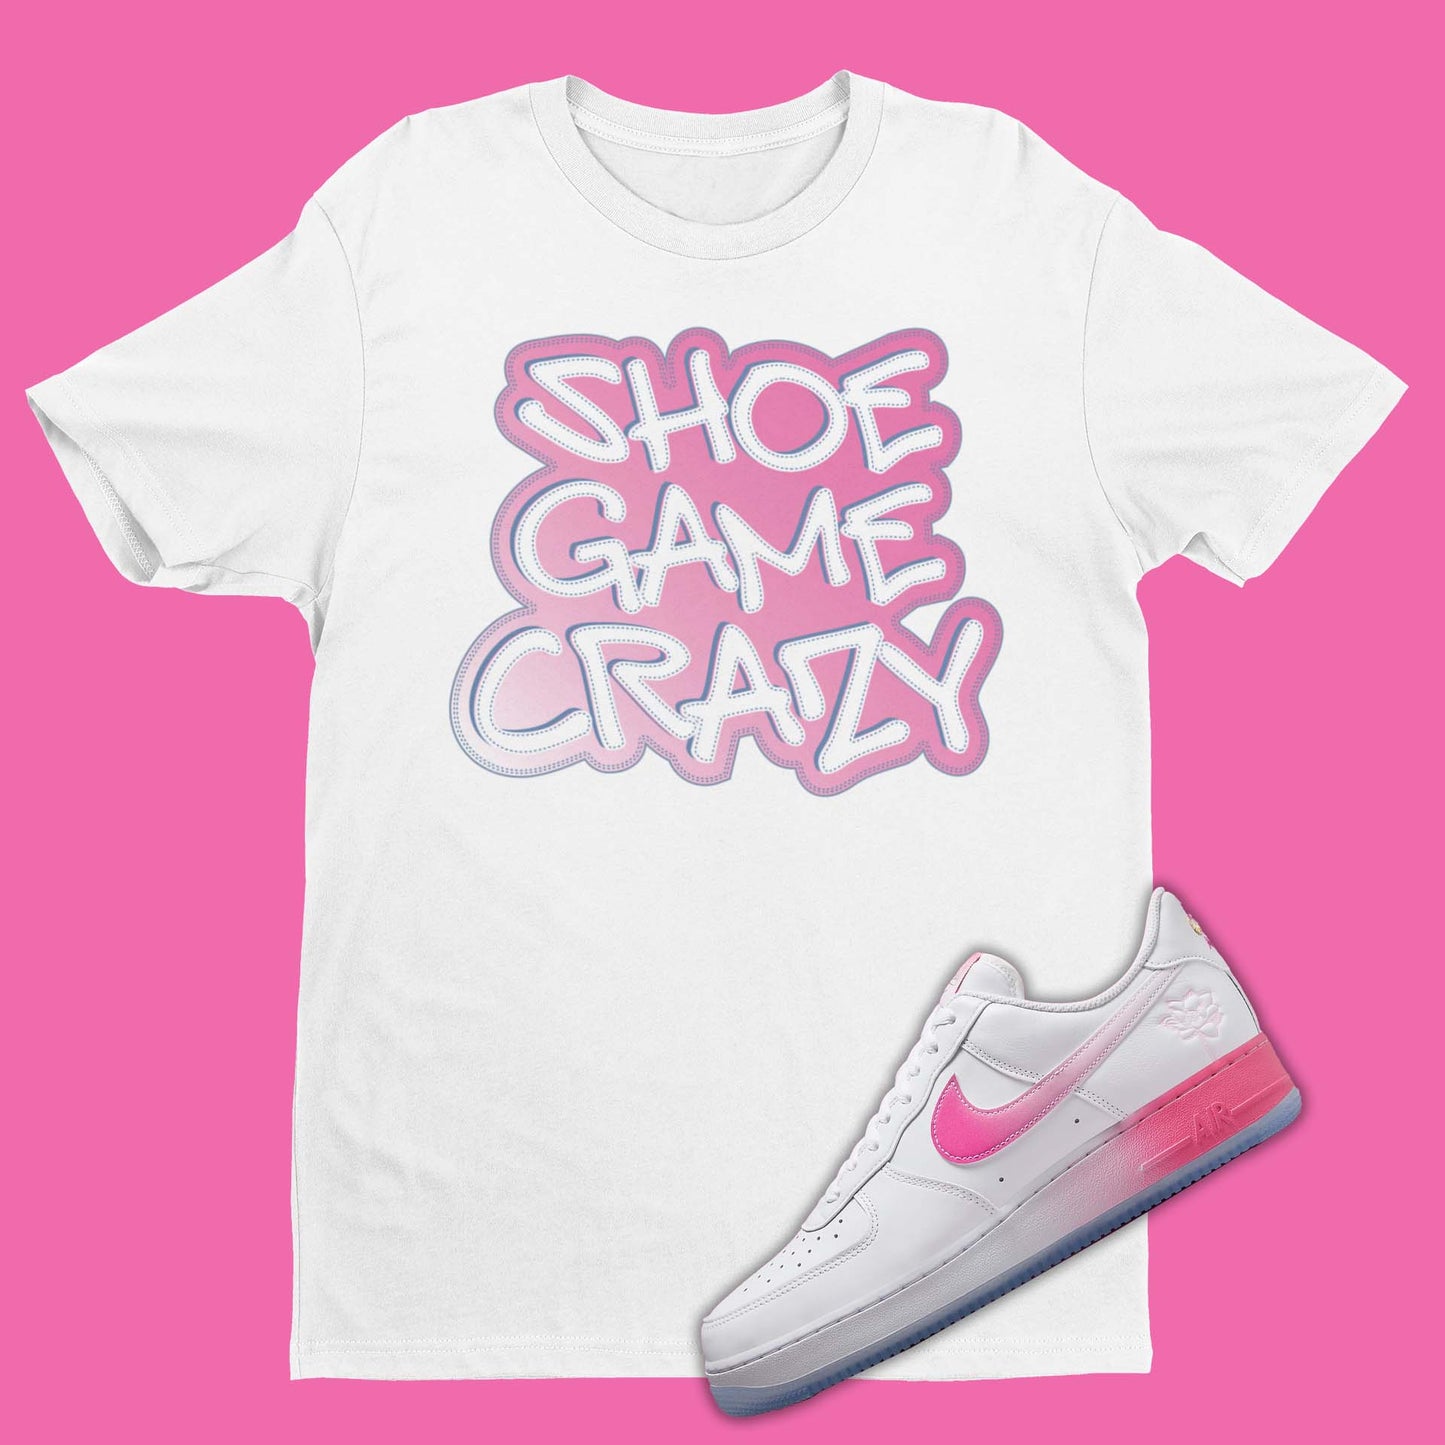 Air Force One San Francisco Chinatown Matching Shirt in white with shoe game crazy in graffiti style letters on front